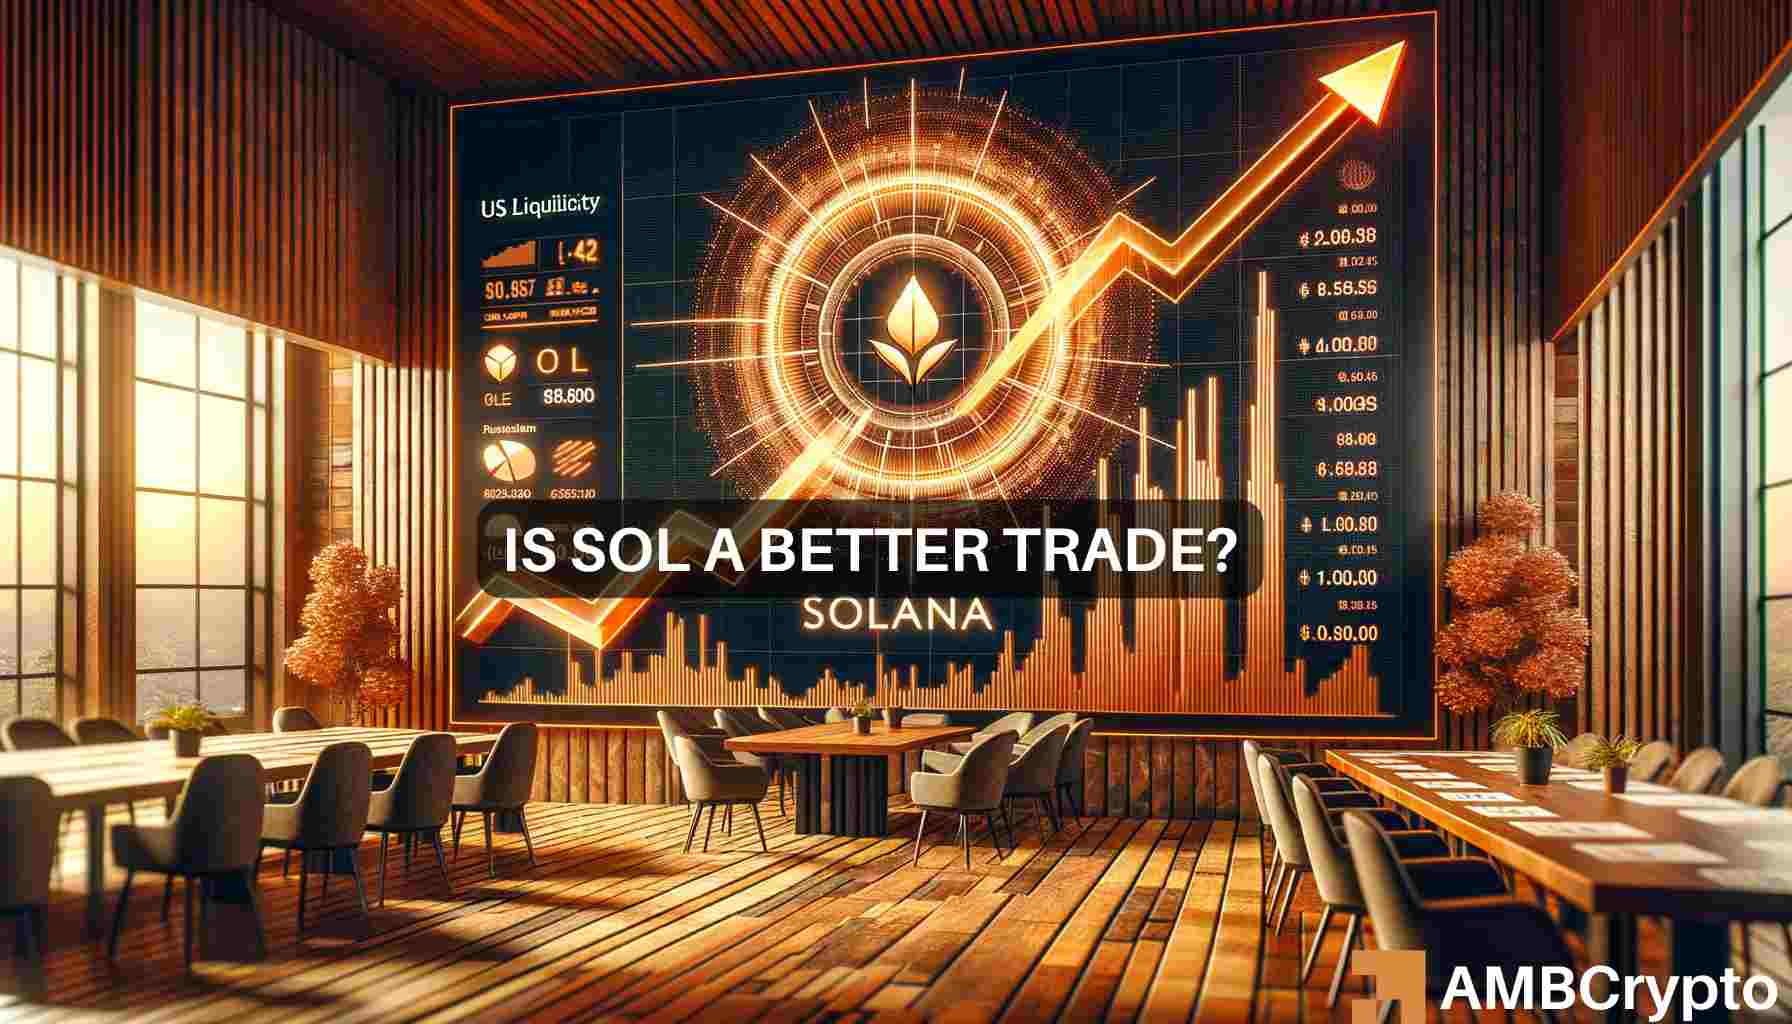 Betting on Solana and ‘doggie coins?’ Here’s why this exec backs that idea